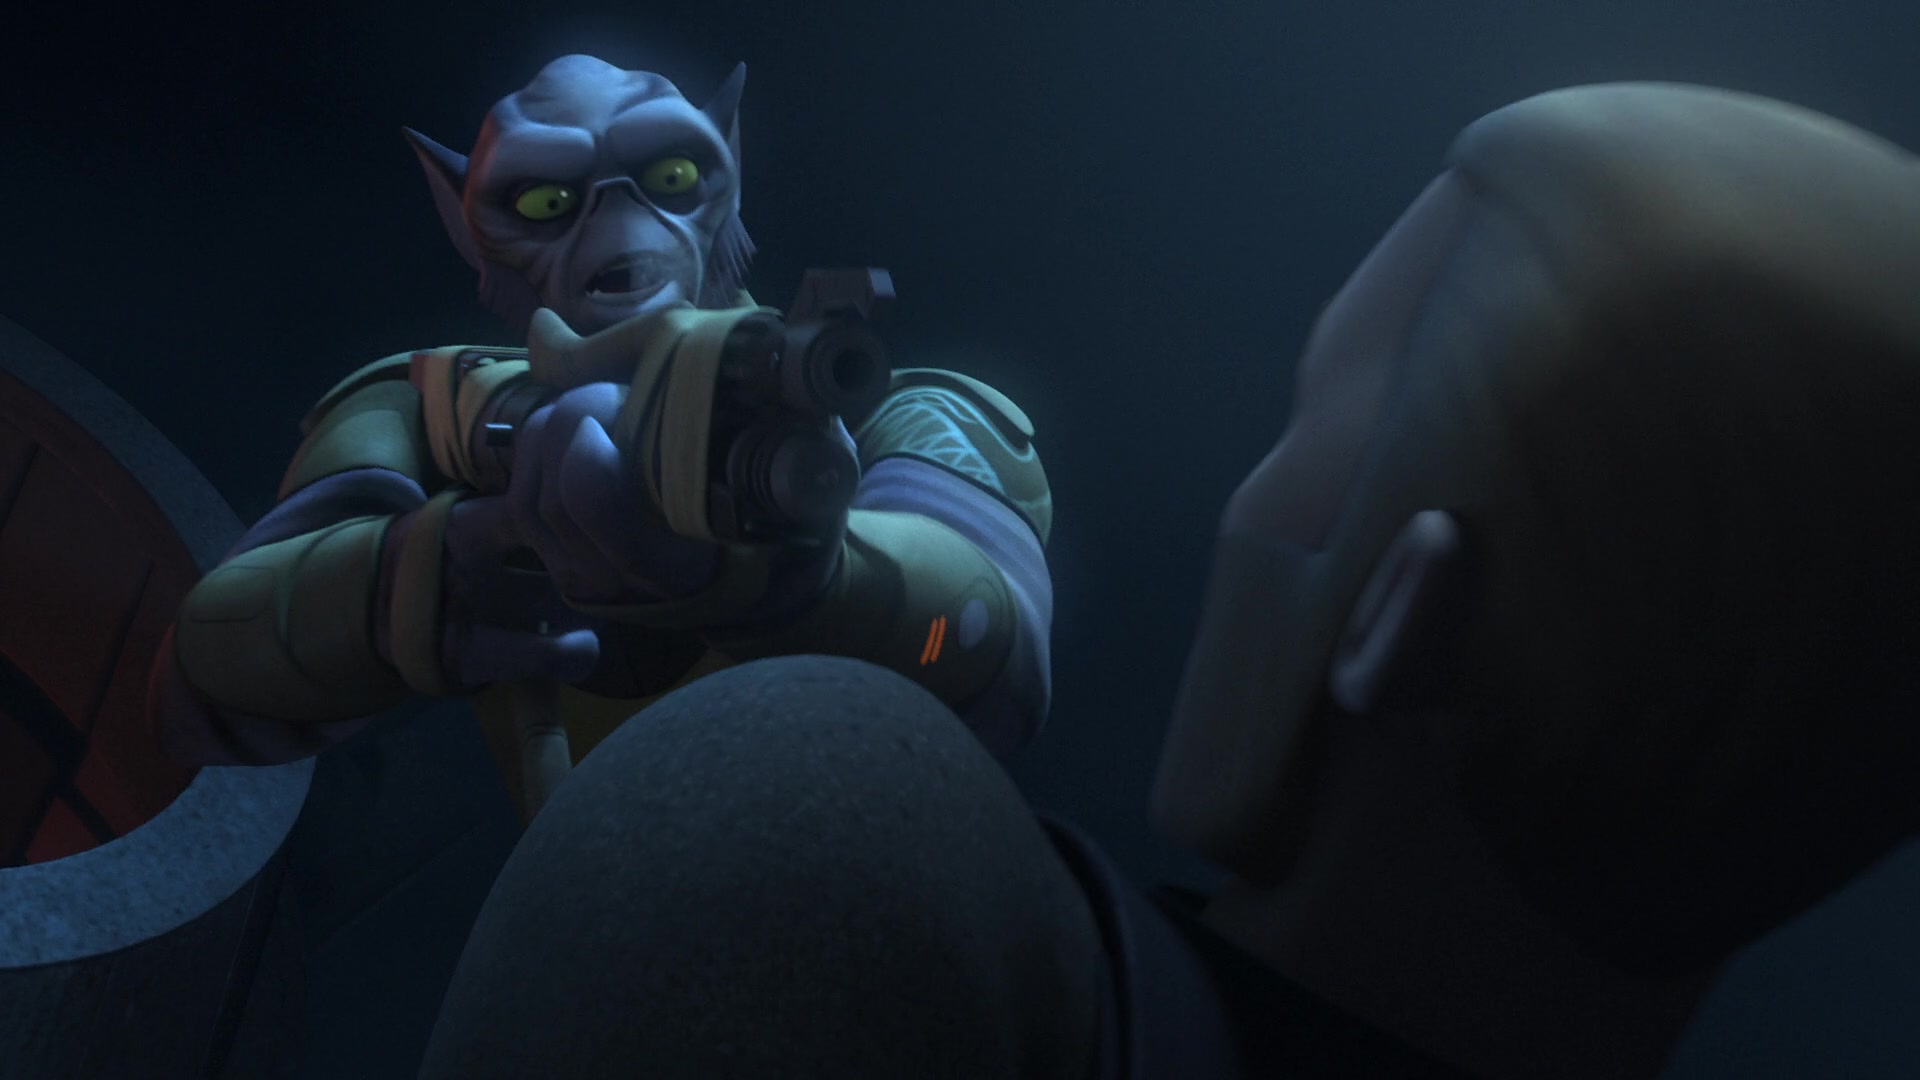 Zeb (Steve Blum) holds Agent Kallus (David Oyelowo) at rifle-point in Star Wars Rebels Season 2 Episode 17 "The Honorable Ones" (2016), Lucasfilm